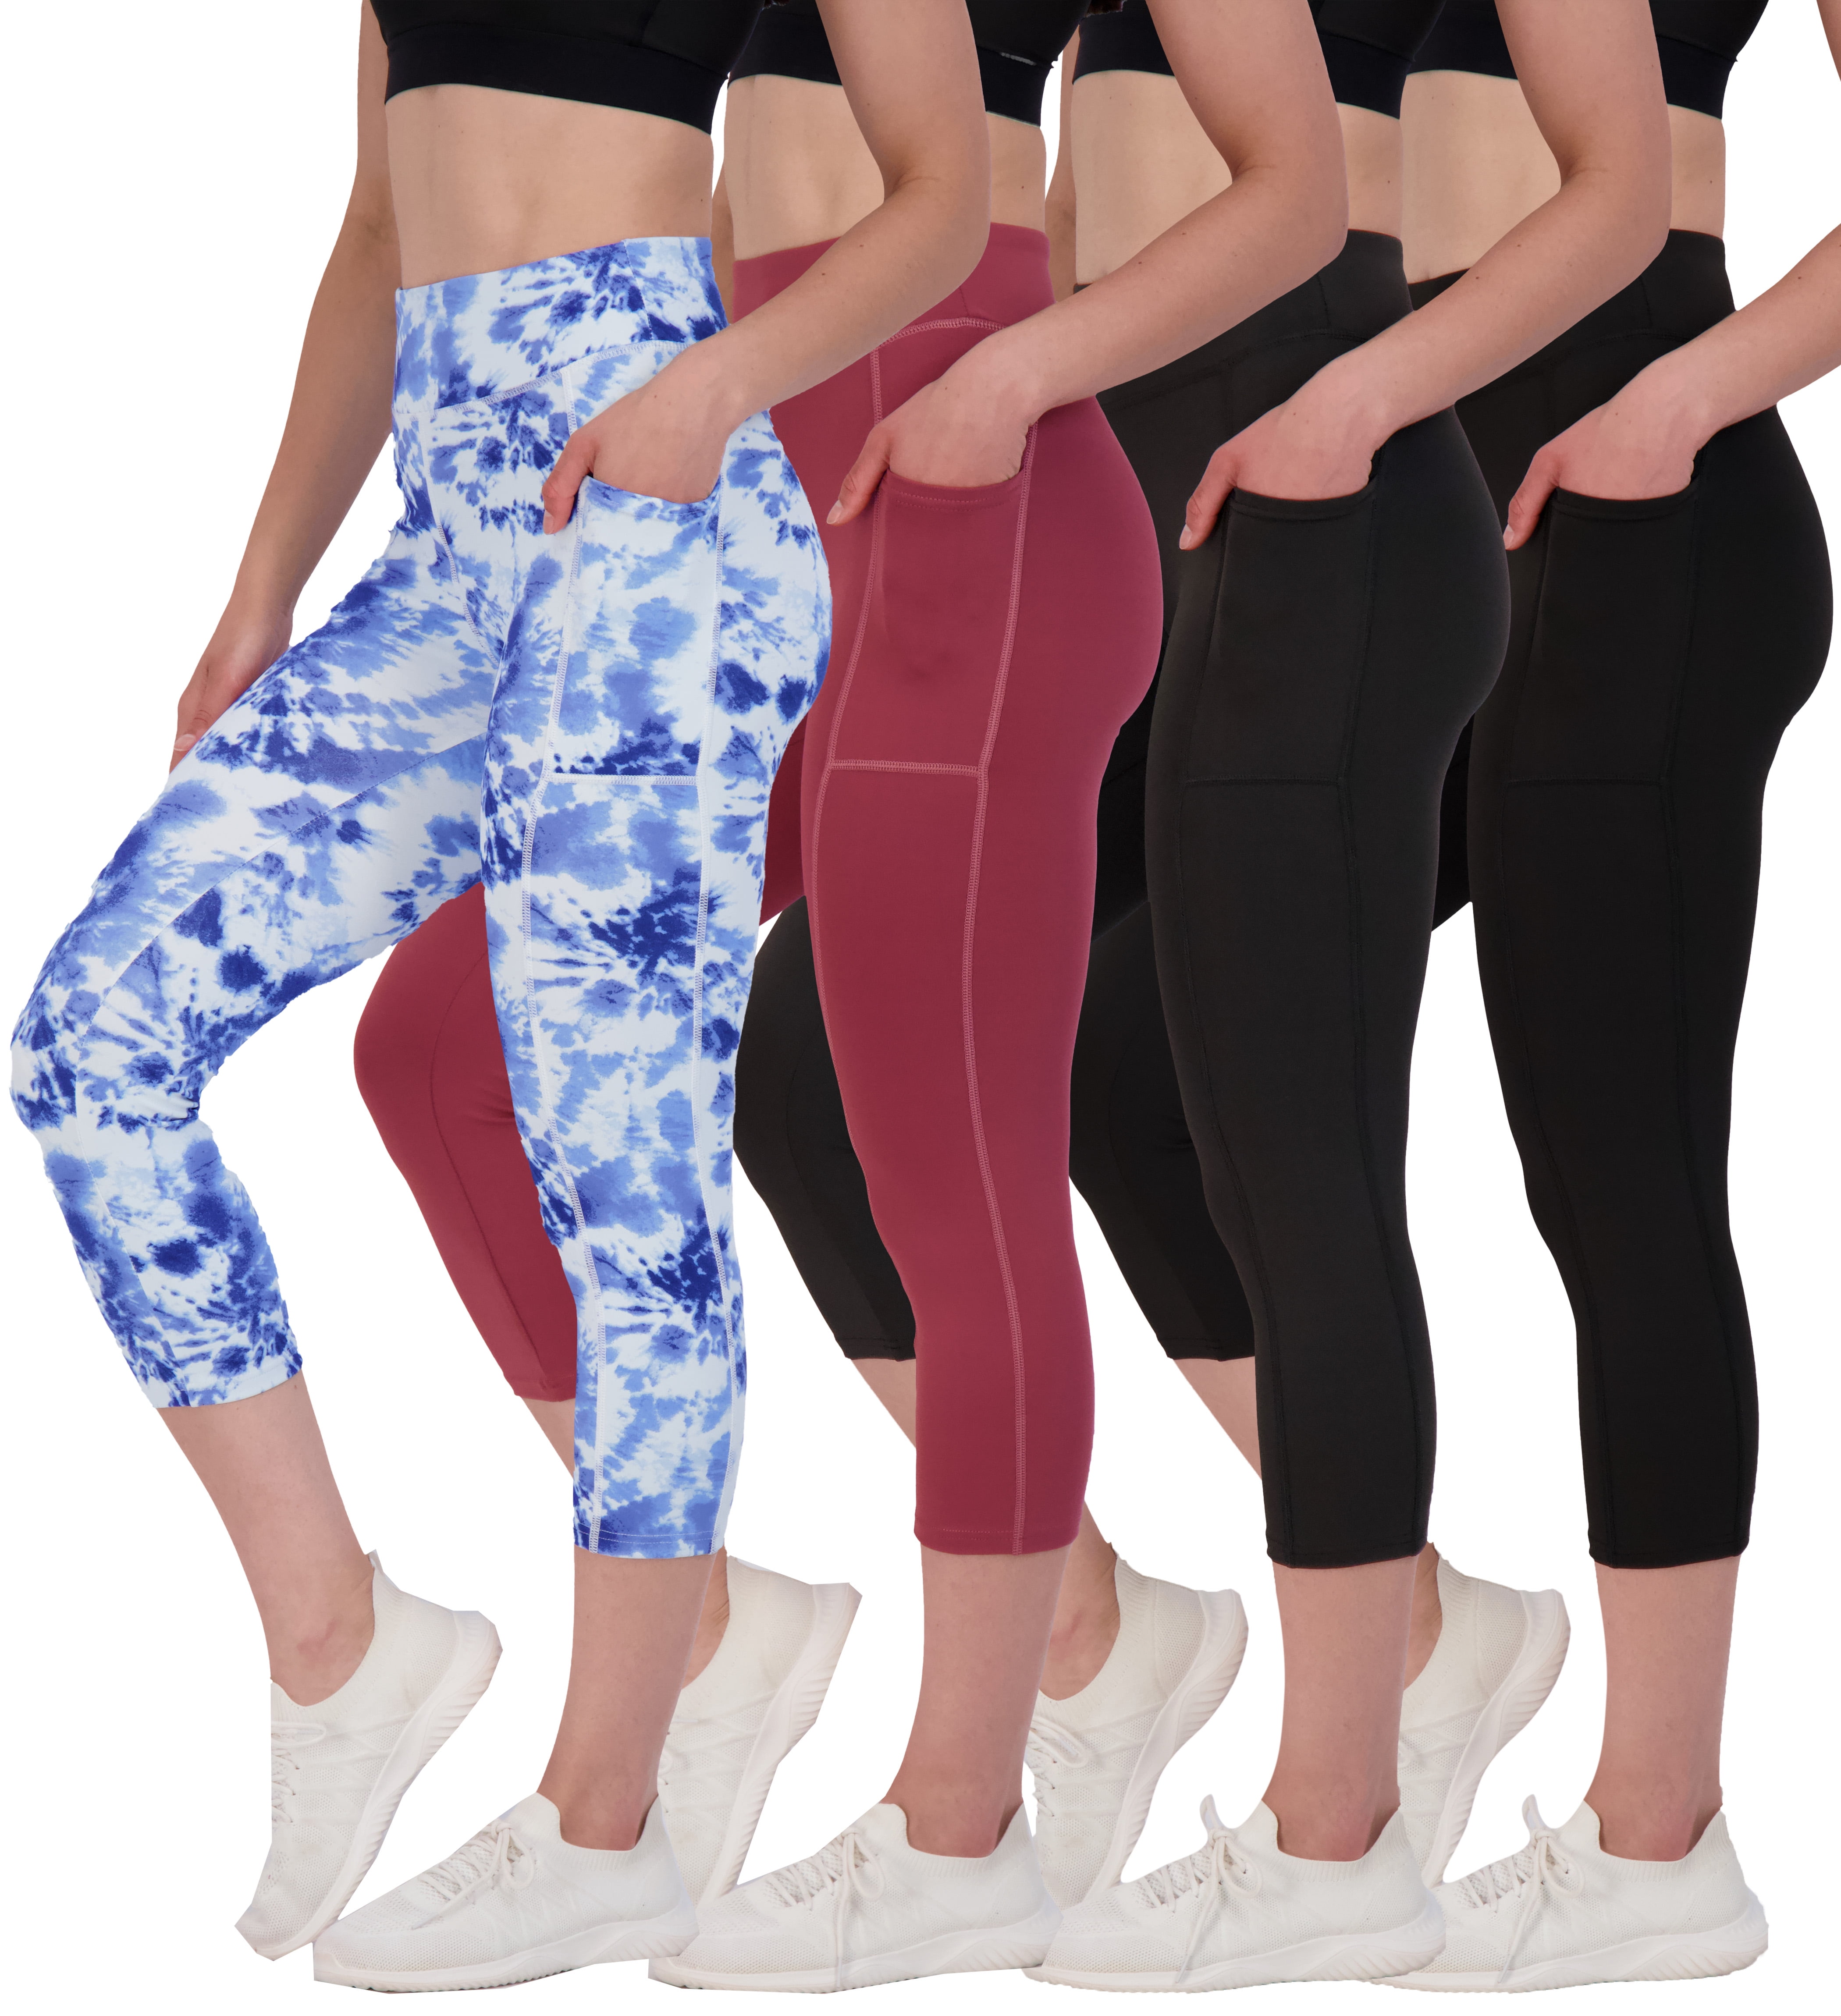 Real Essentials 4 Pack: Women's Capri Leggings with Pockets Casual